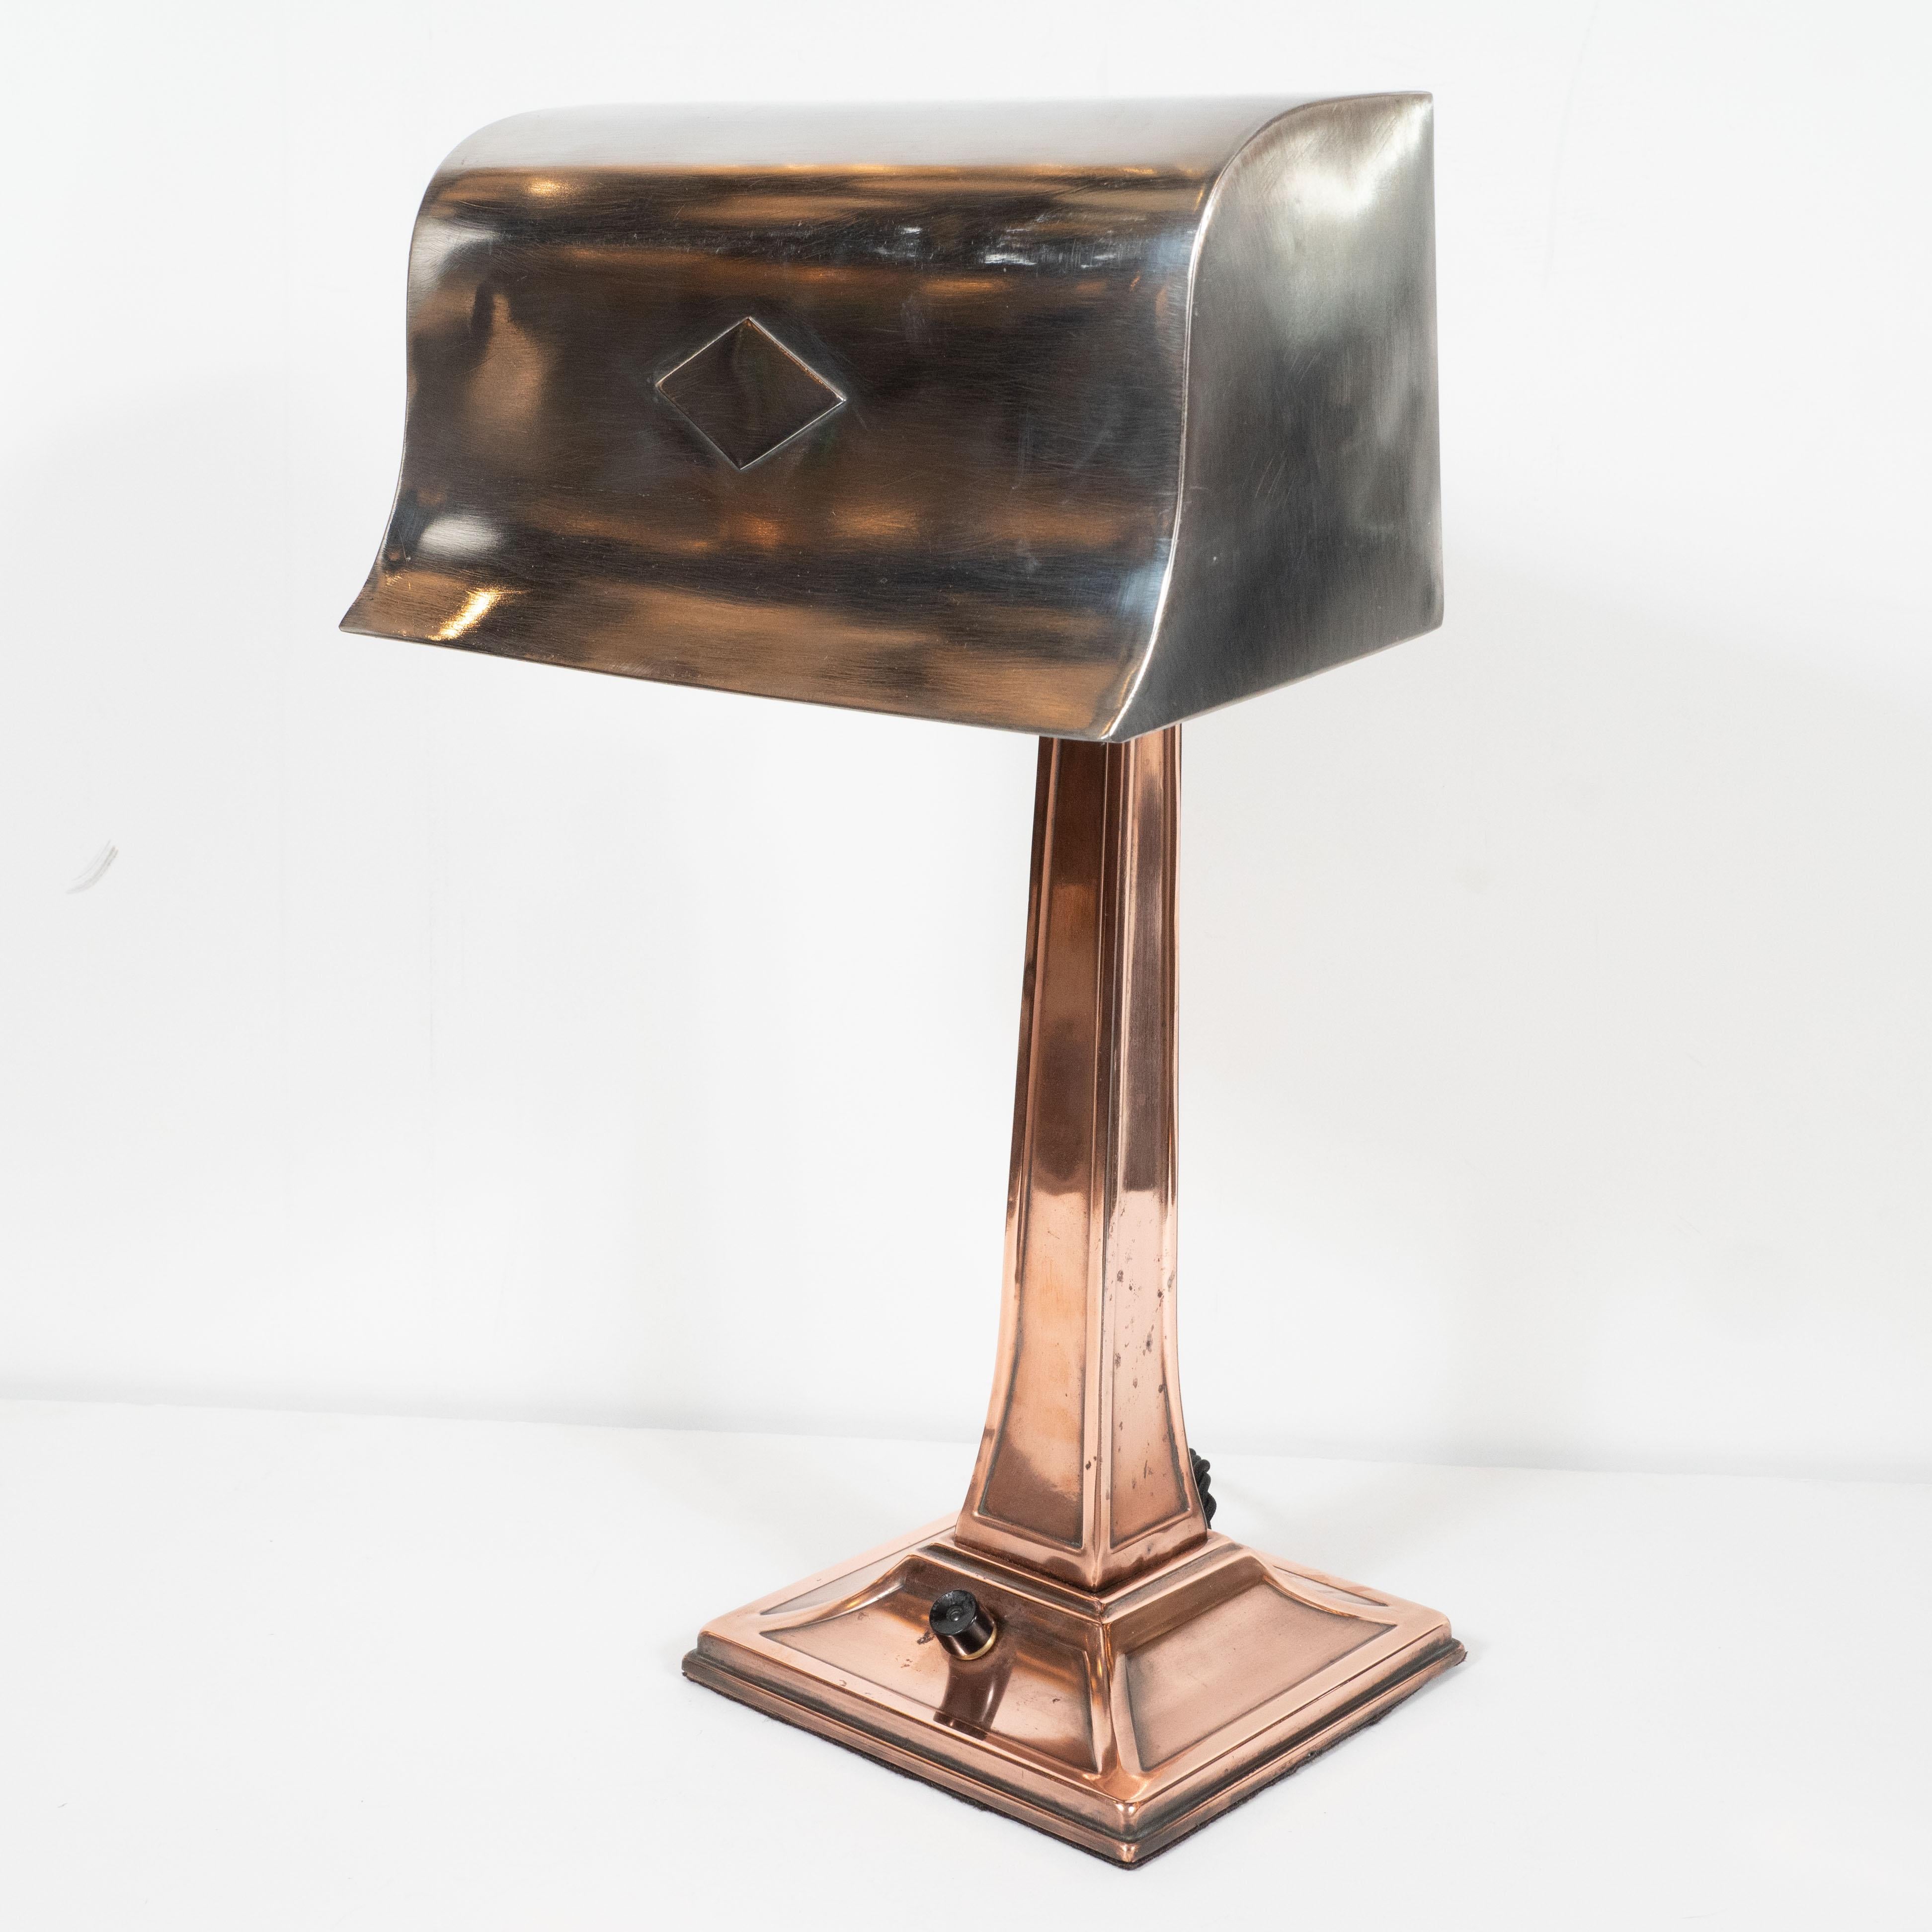 Early Art Deco Copper & Polished Aluminum Table Lamp with Cubist Embellishment For Sale 2